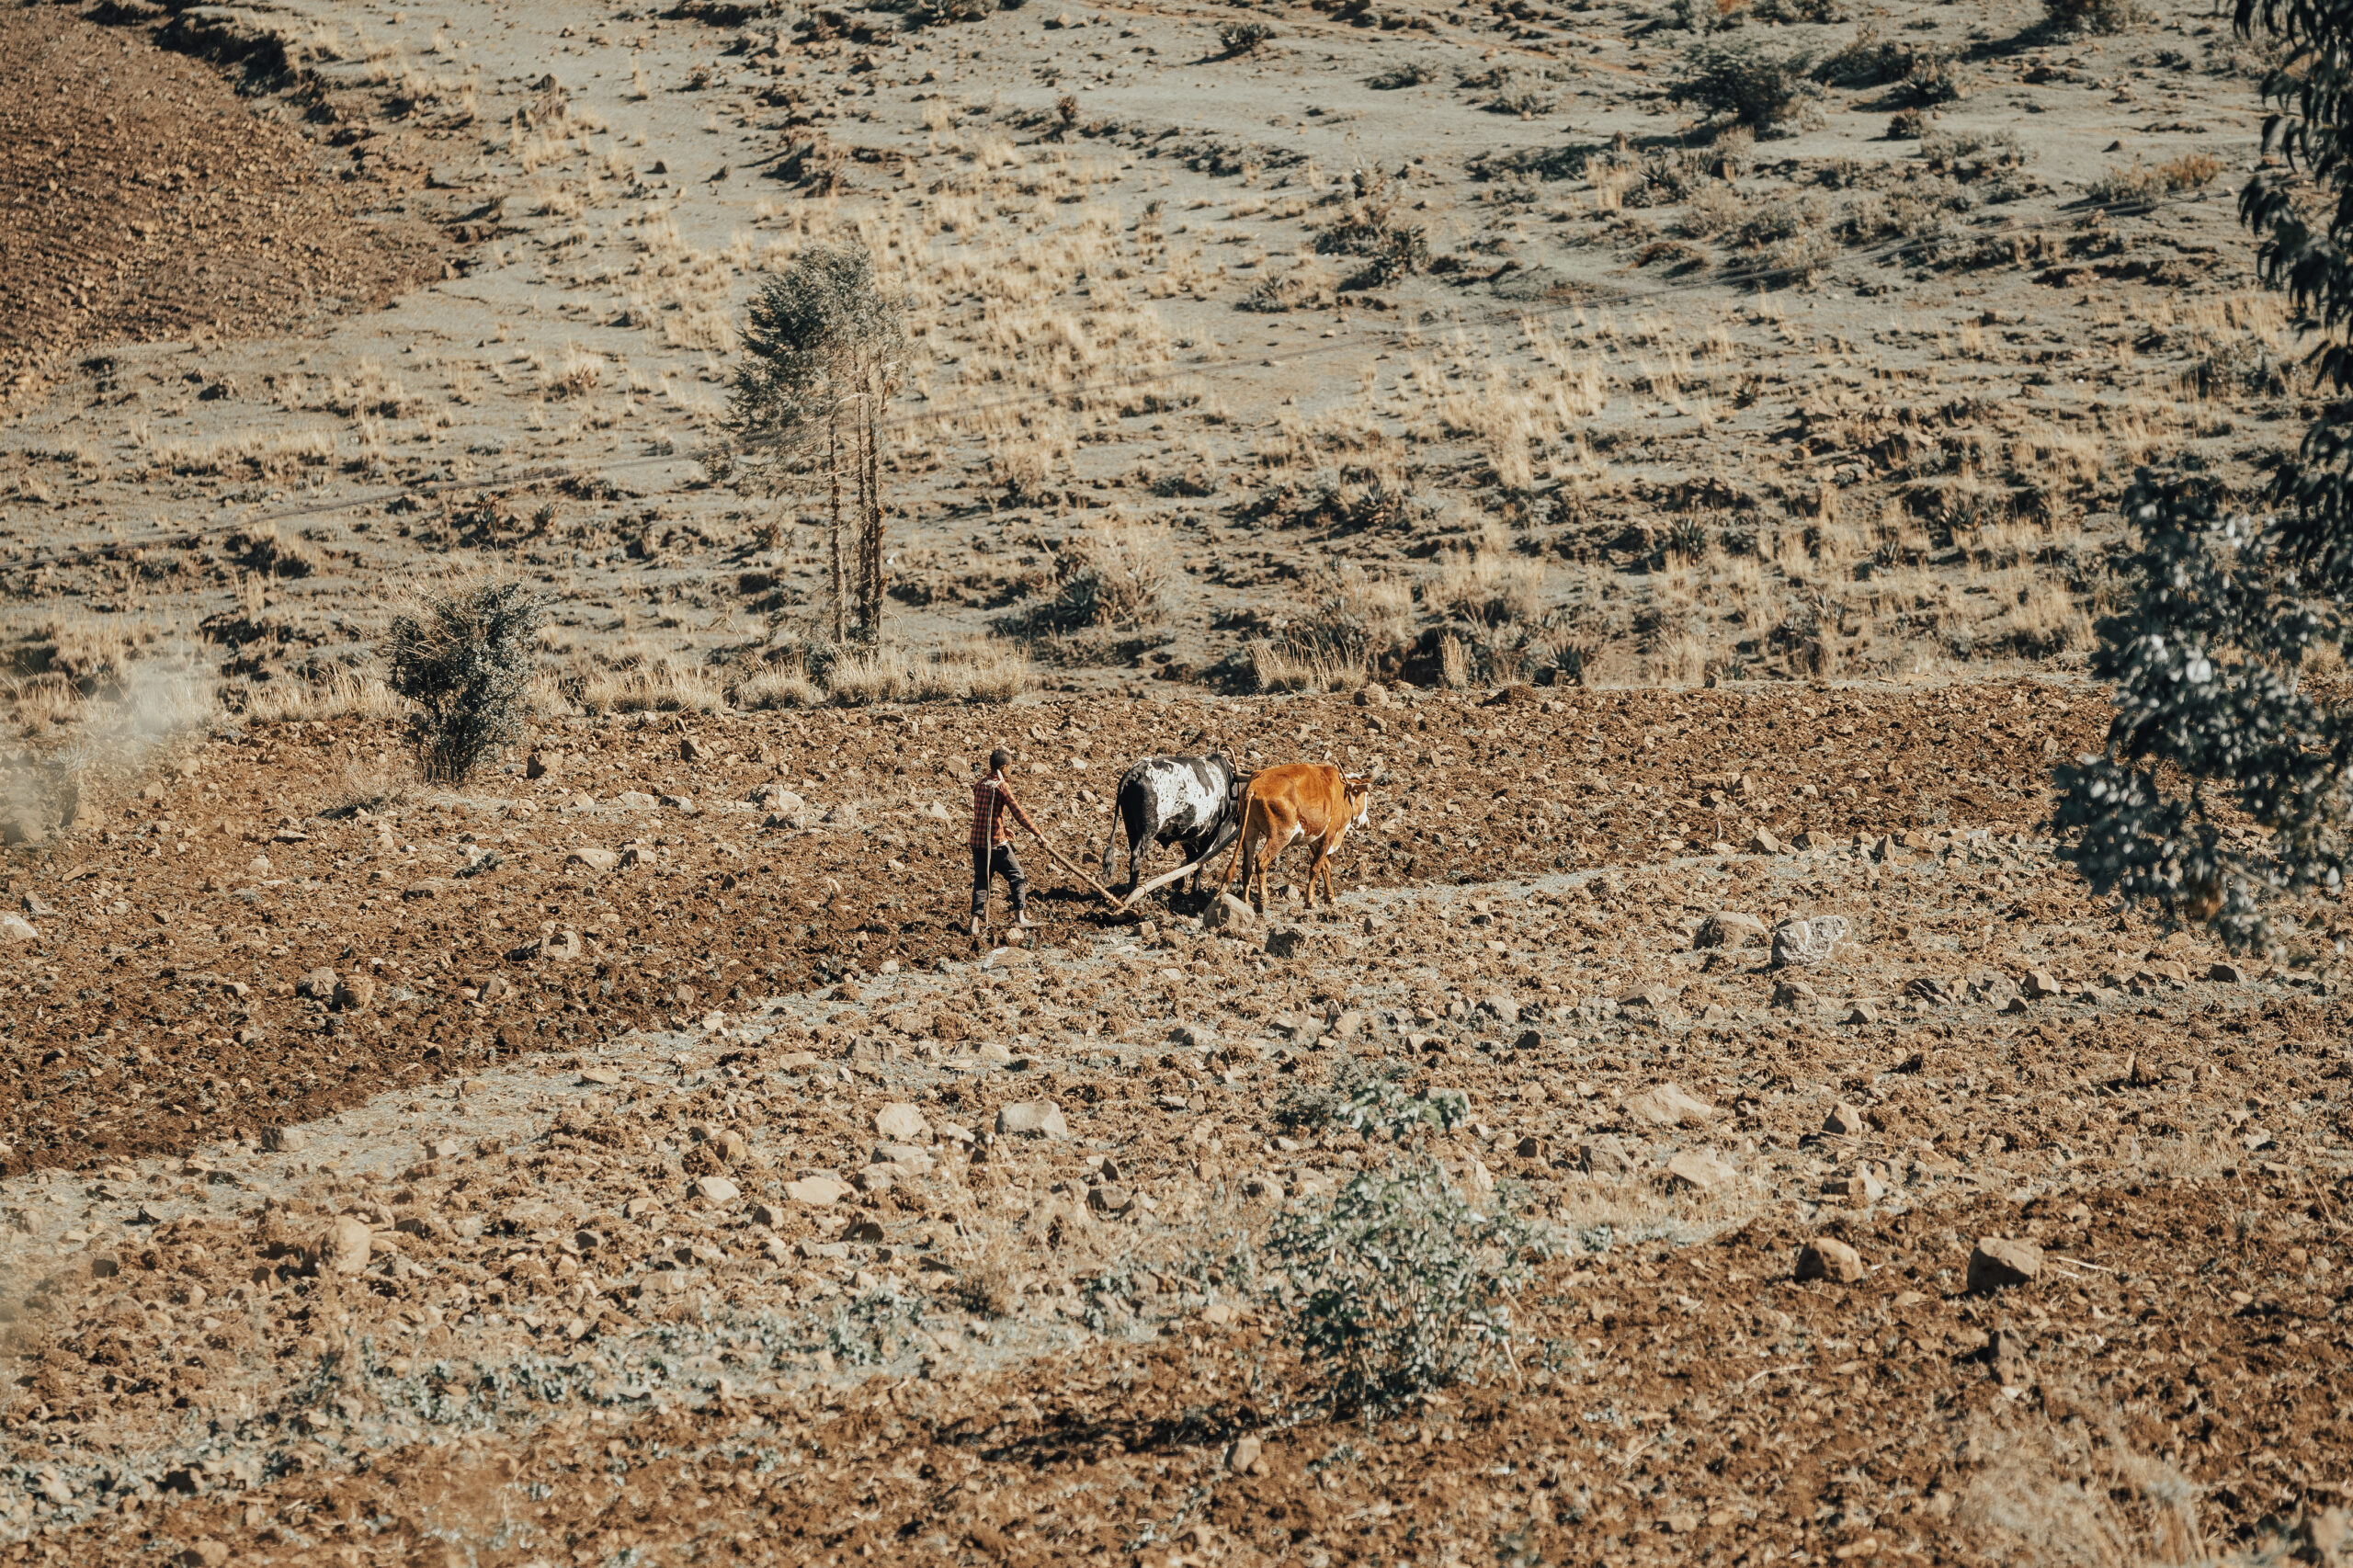 Photo of Ethiopian farmer plowing rocky fields with plow pulled by cows